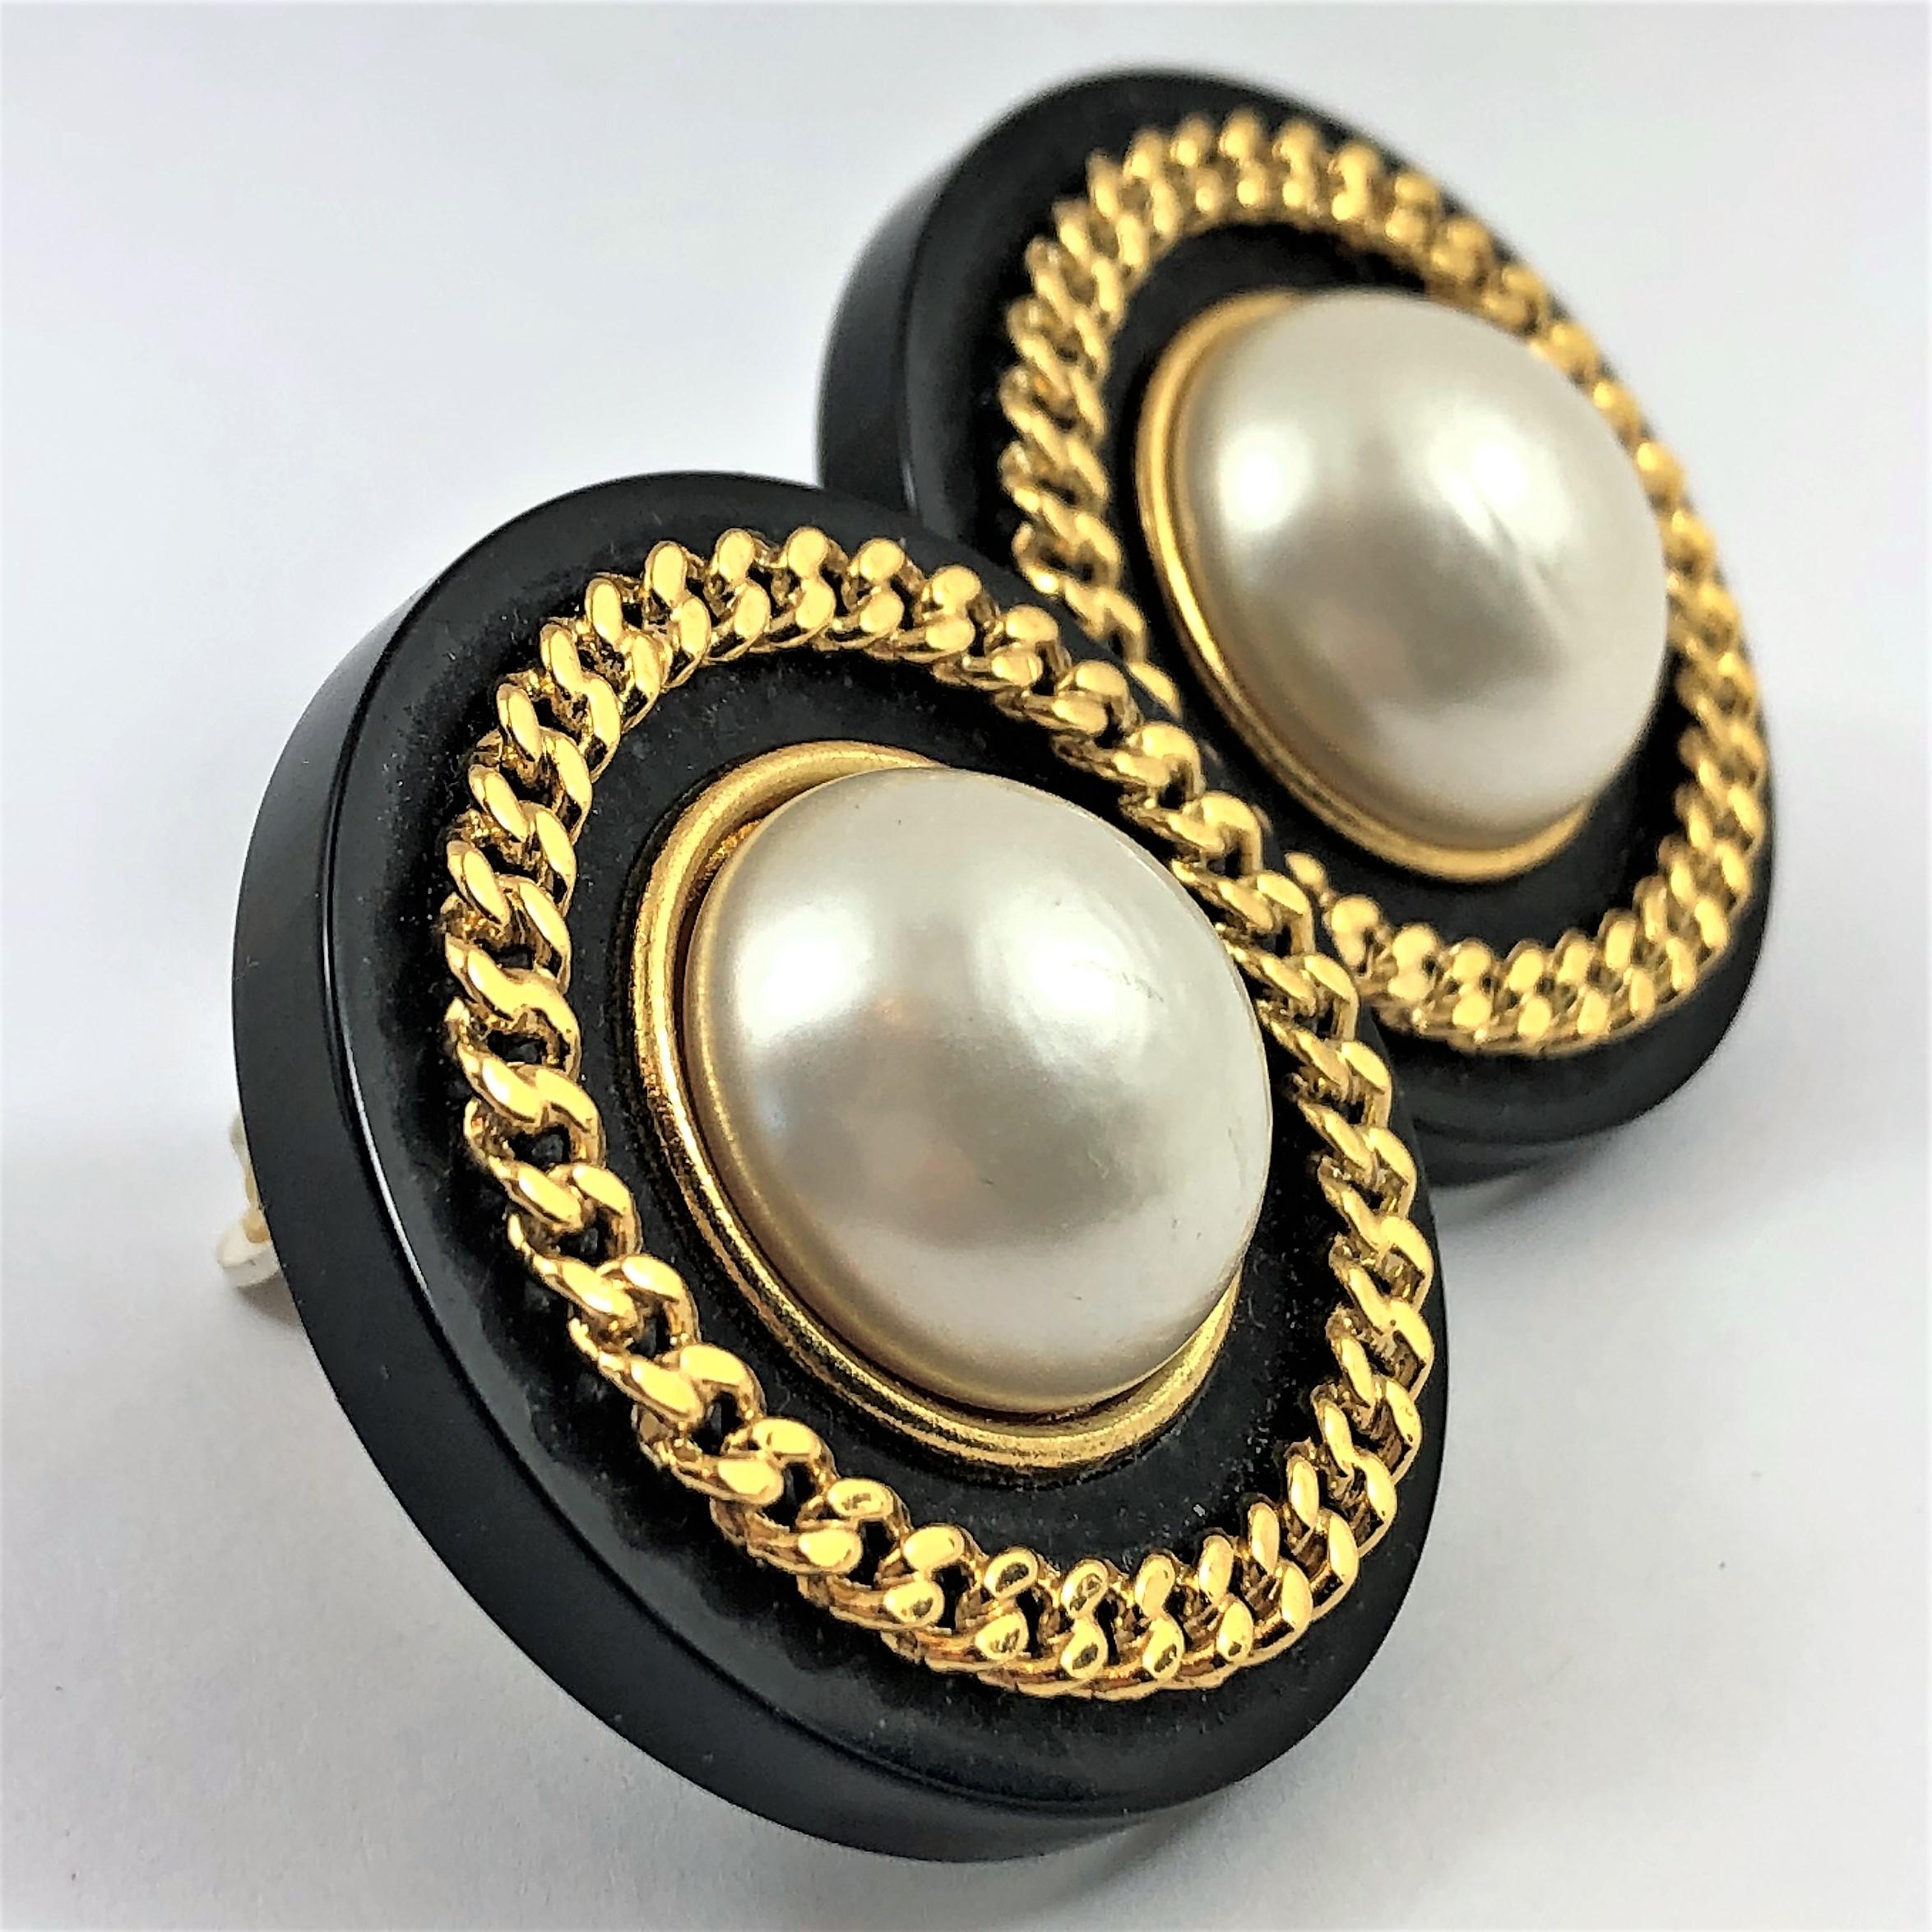 Vintage Chanel clip on earrings 1 5/8 Inch diameter, Black Resin background with large faux pearl in the center,  surrounded by gold tone chain. Part of Chanel's Season 28 
from 1991. Classic Chanel. large size yet still very tailored. Marked Chanel